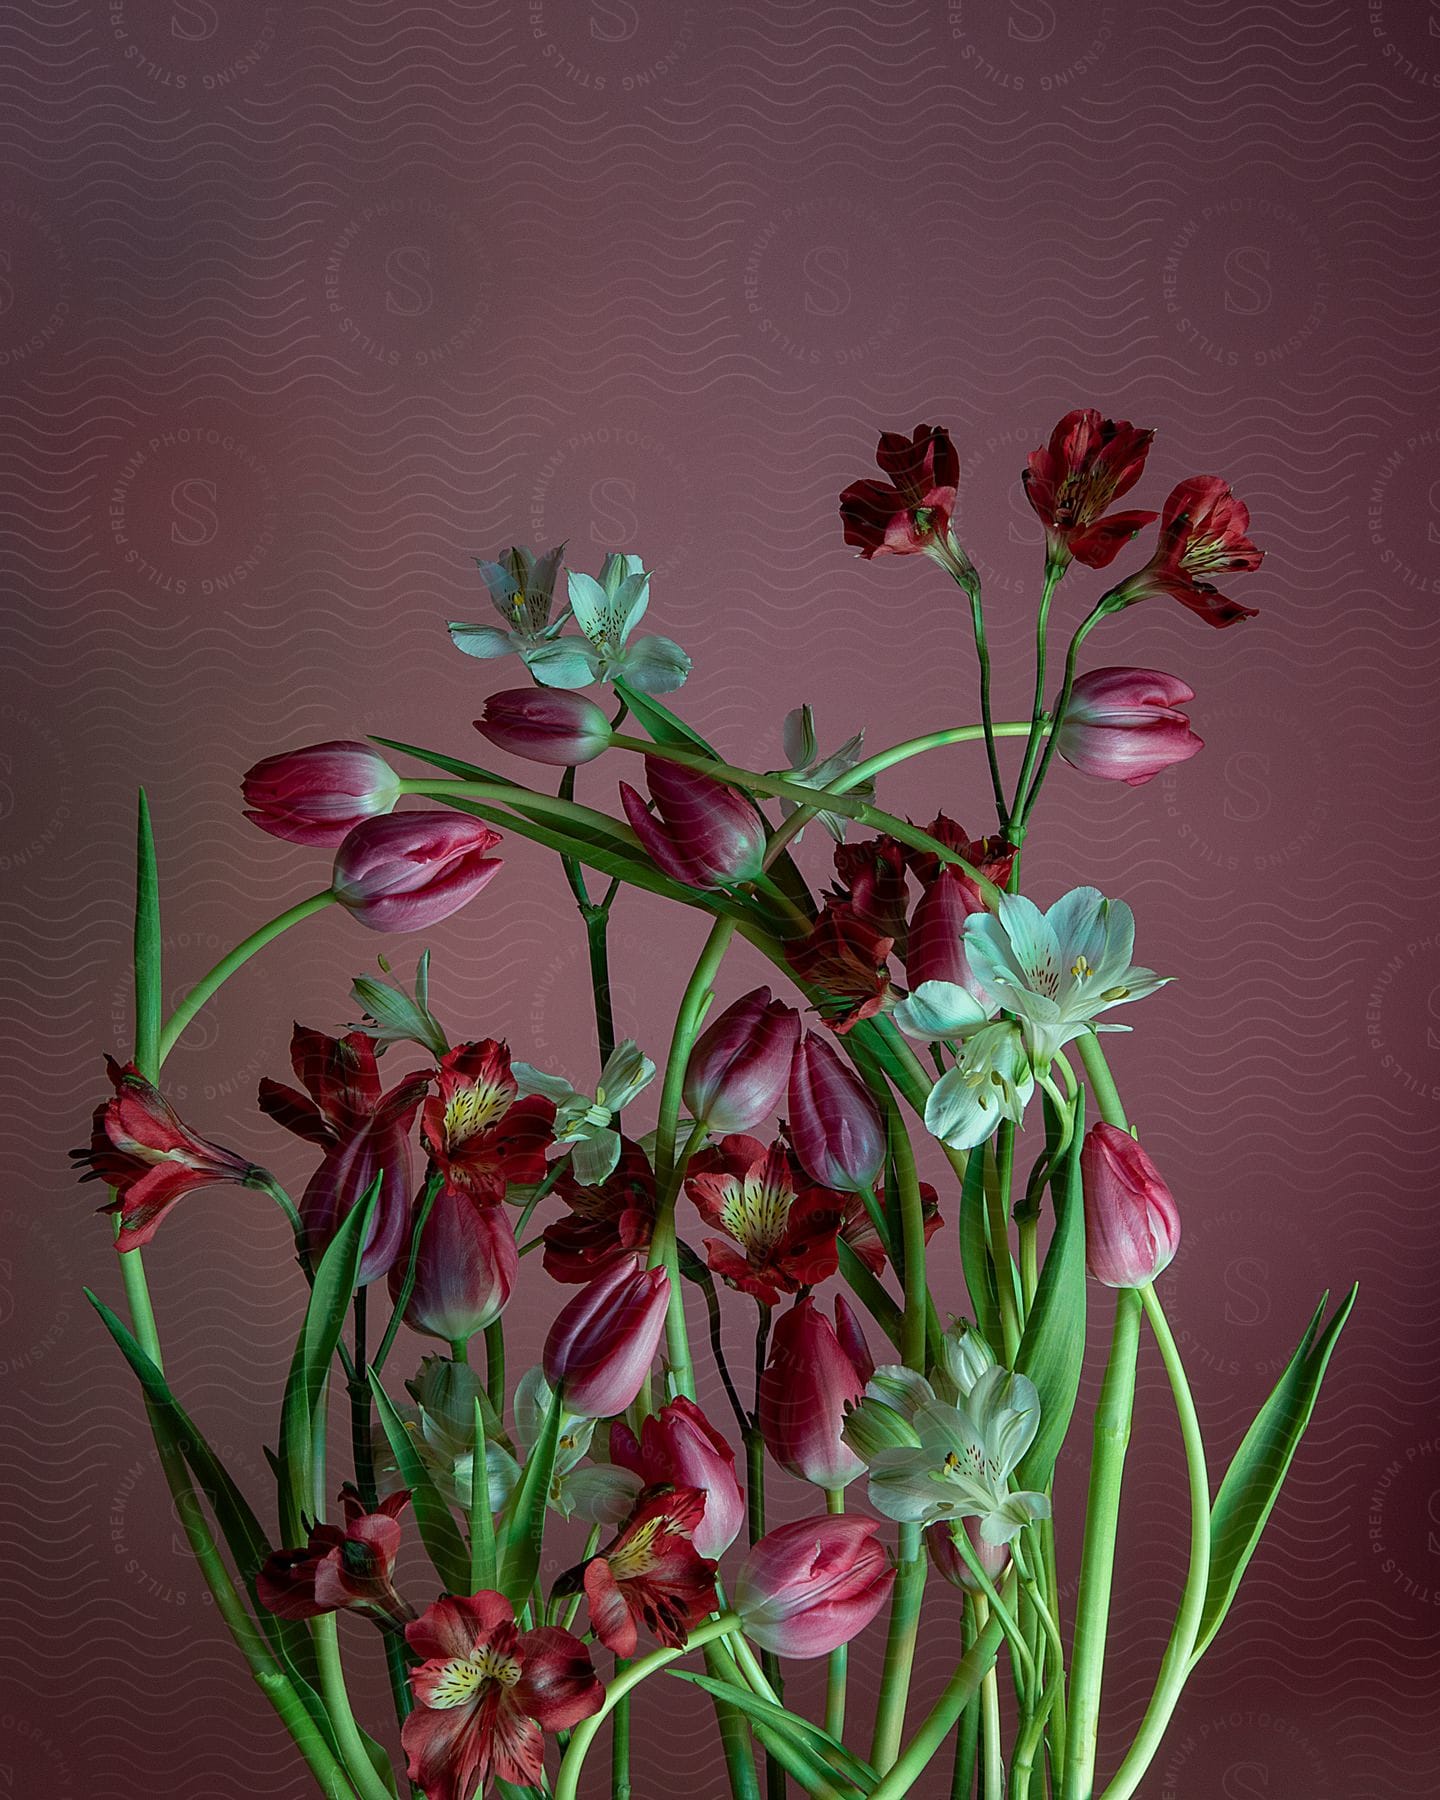 A bouquet of red and white flowers are arranged against a dark pink background.